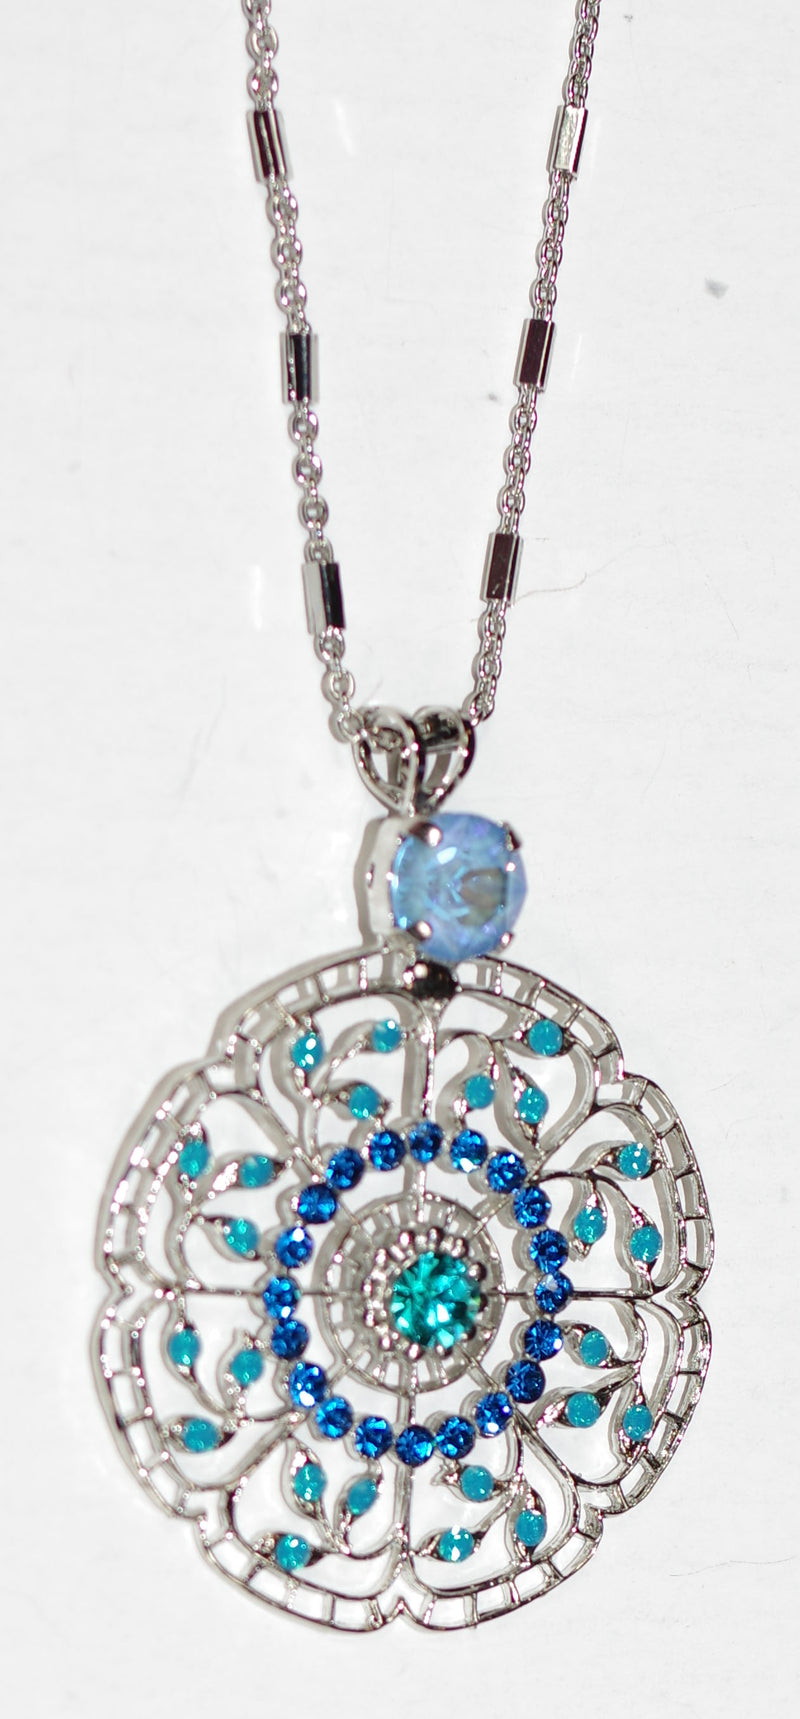 MARIANA PENDANT SERENITY: blue, teal stones in 2" silver rhodium setting, 32" adjustable chain